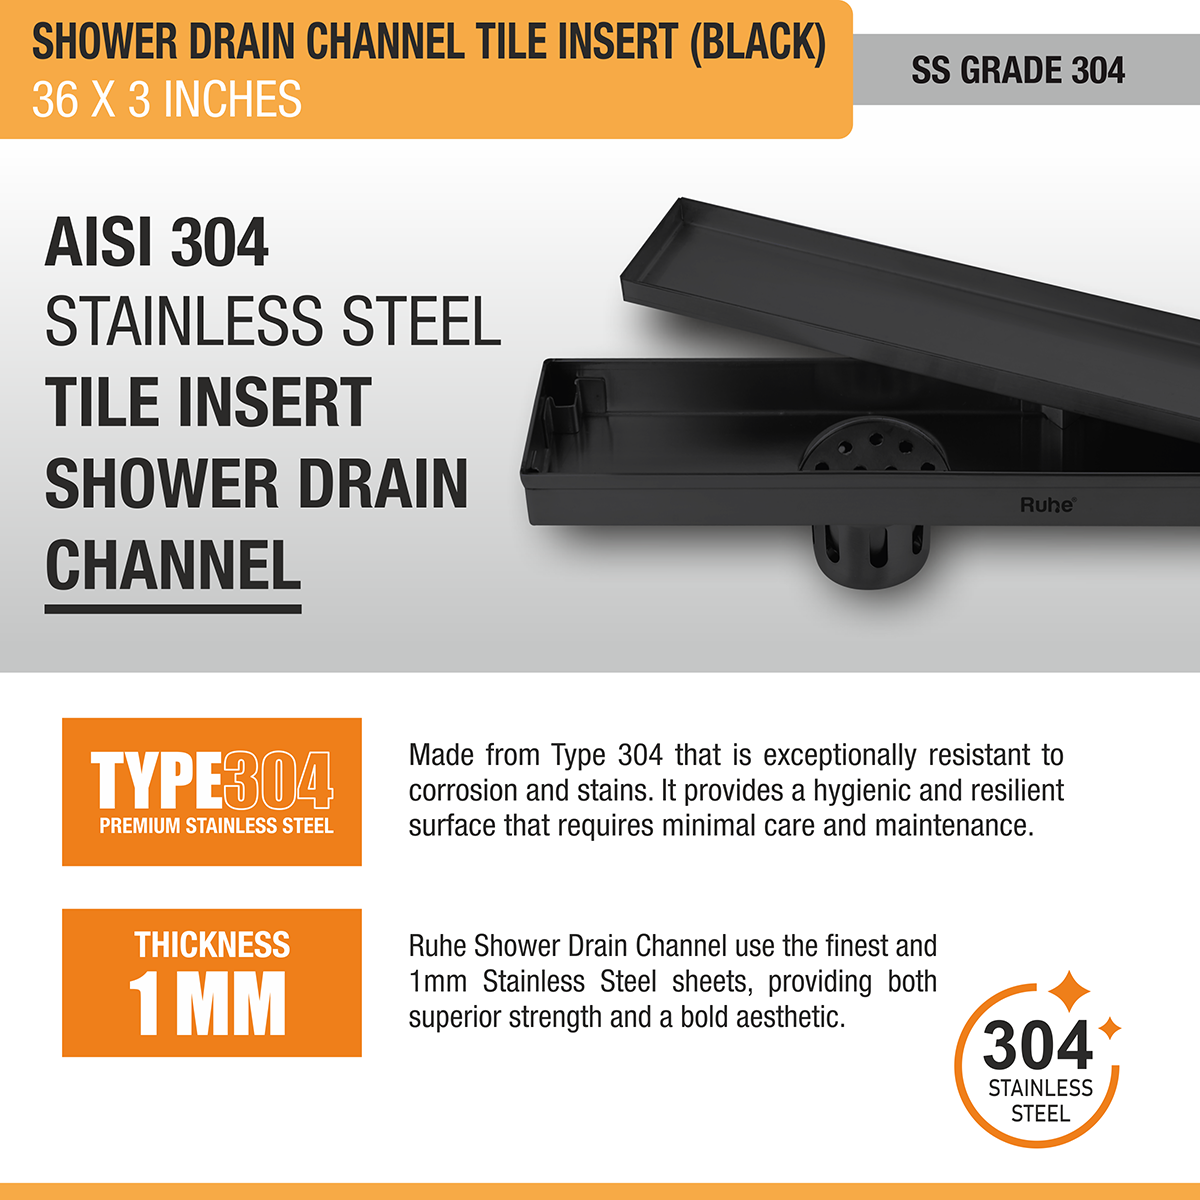 Tile Insert Shower Drain Channel (36 x 3 Inches) Black PVD Coated - by Ruhe®